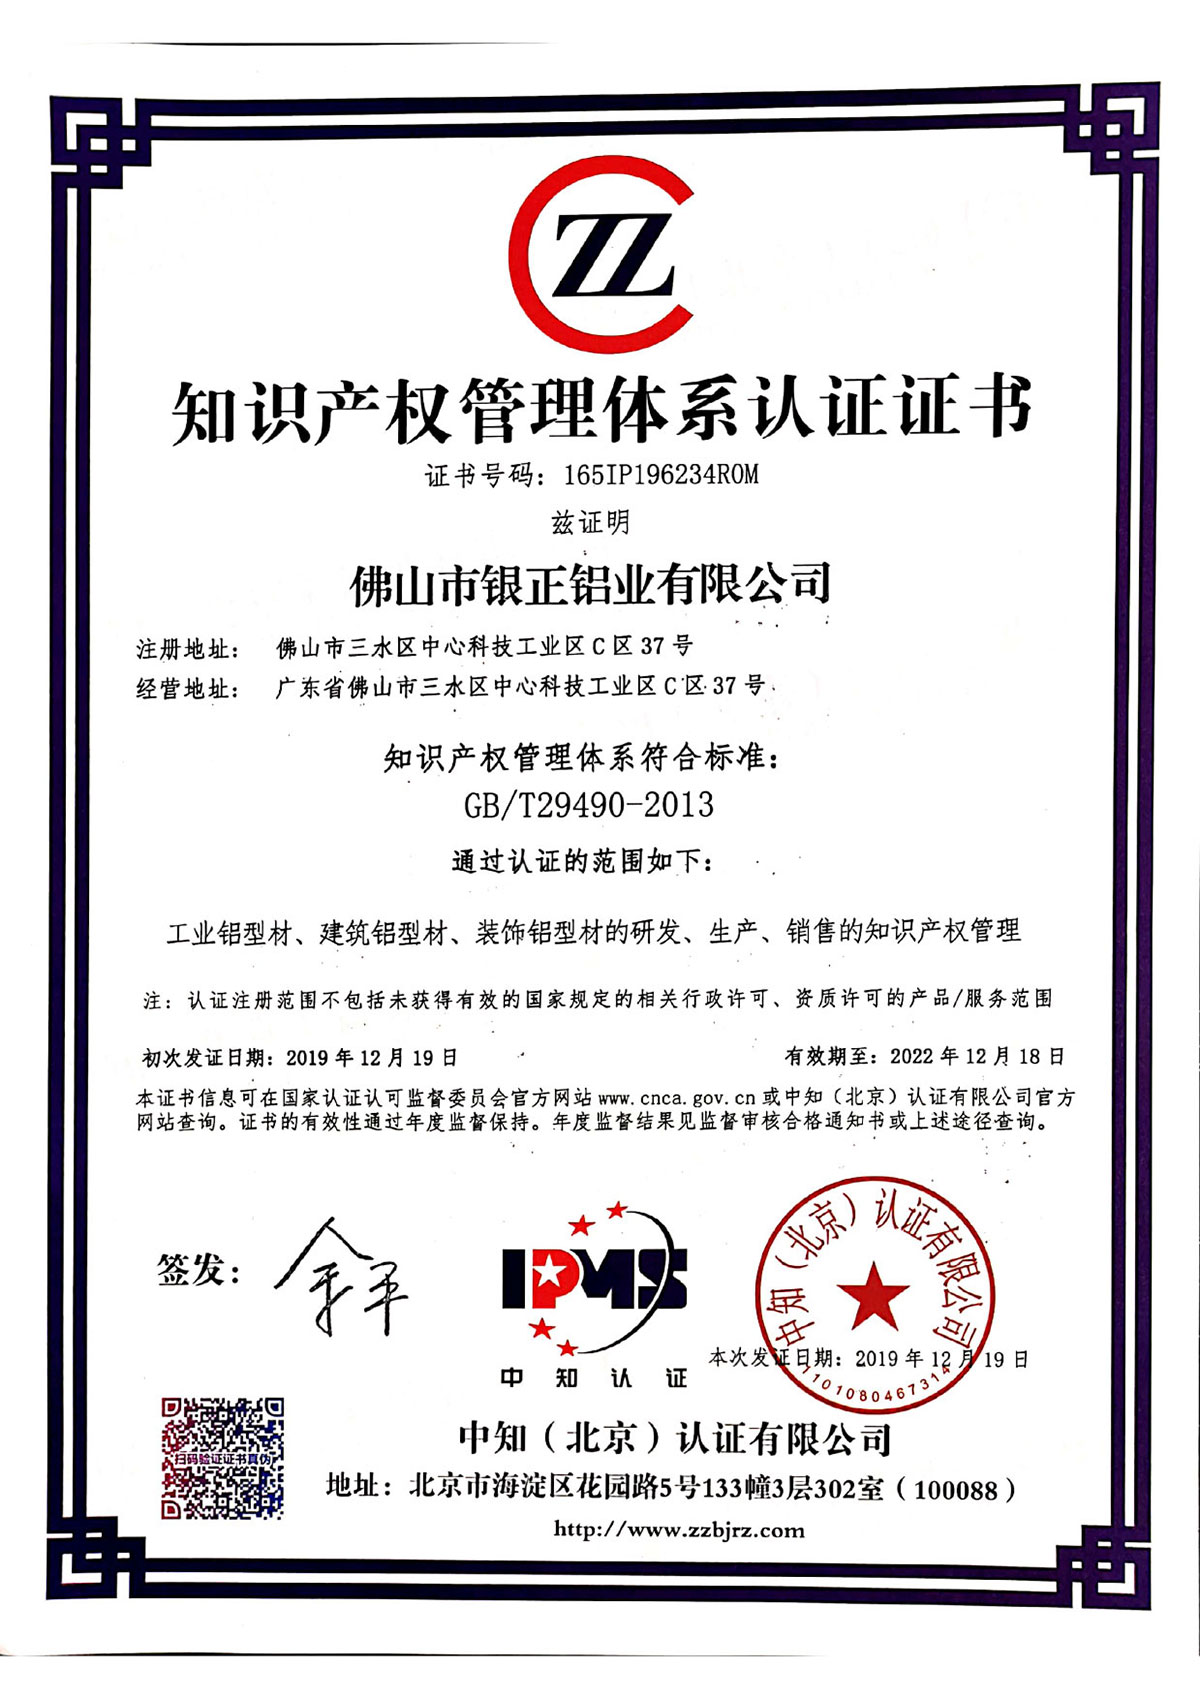 Certificate of intellectual property management system